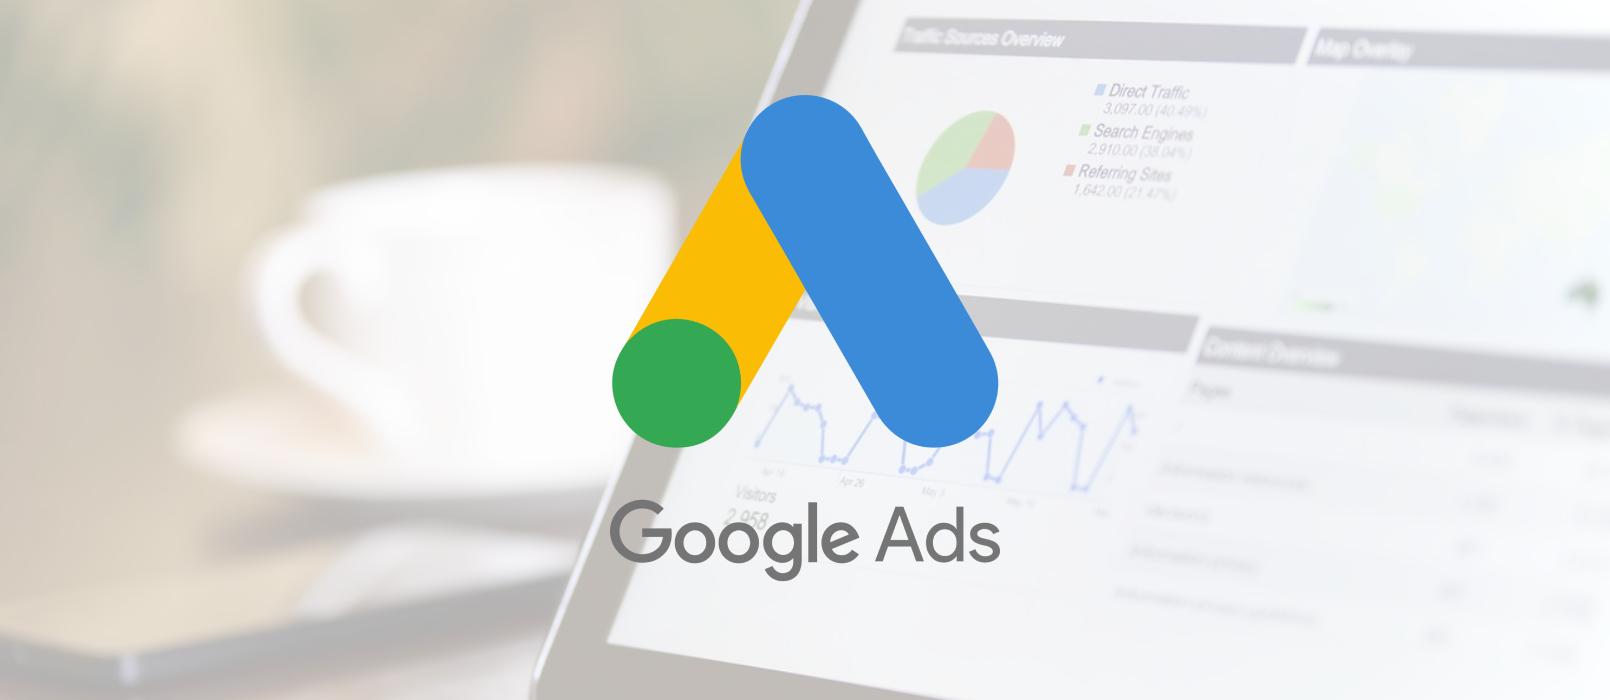 What is Google Ads (formerly Google Adwords)? How to manage a Google Ads campaign?